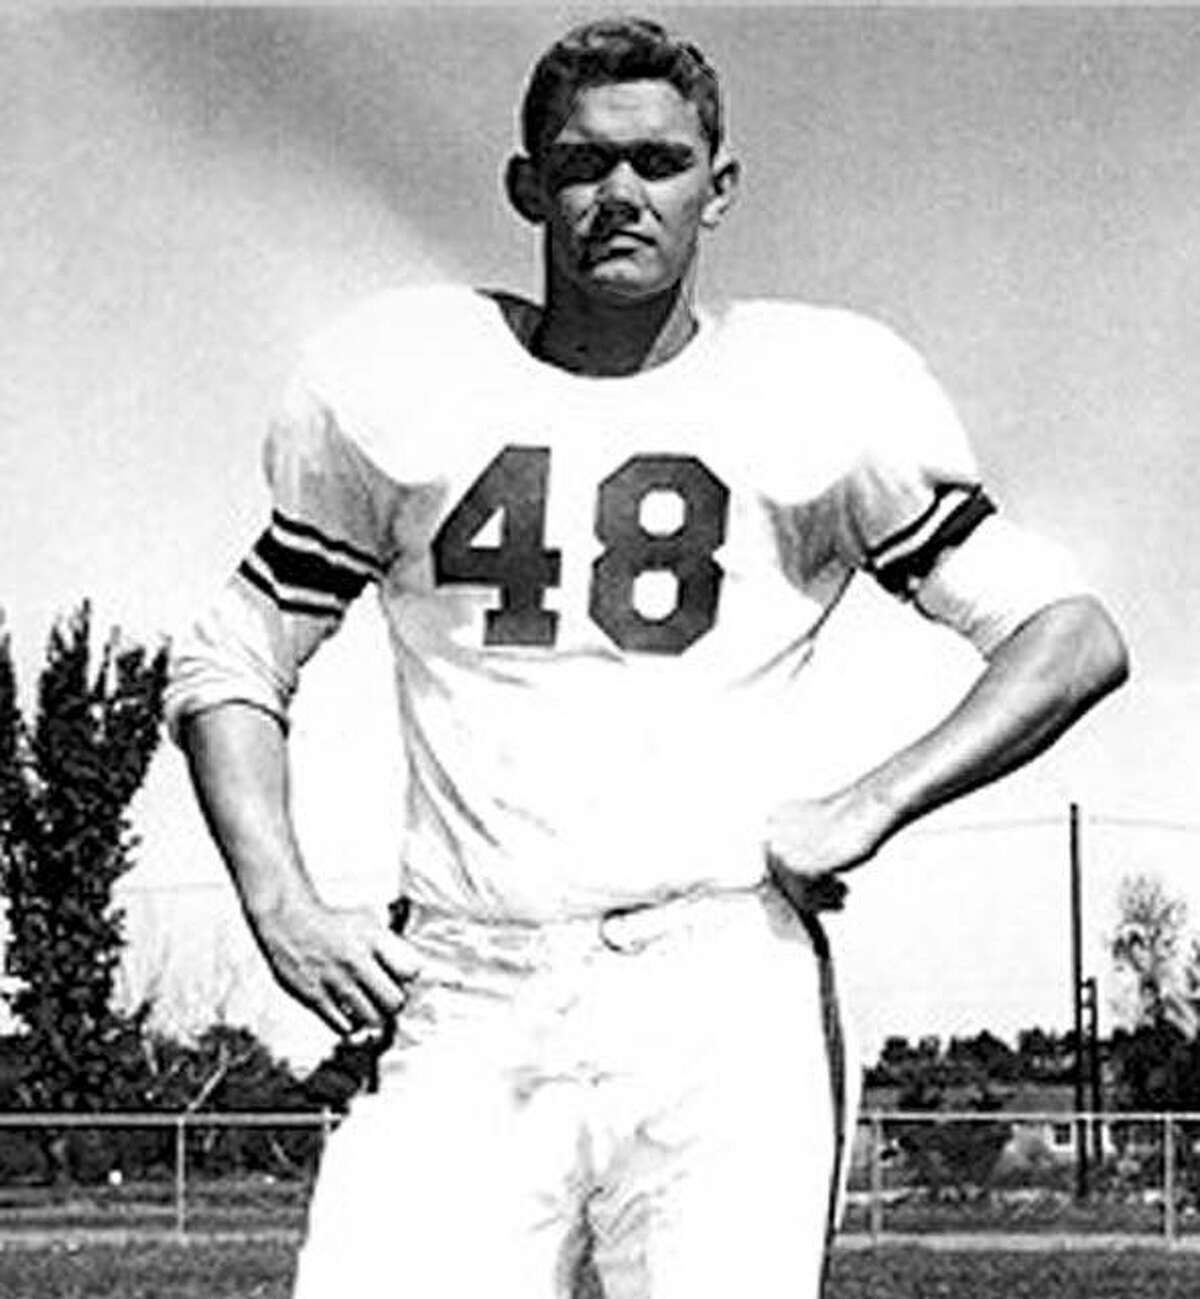 Former Alton, Granite City, EA-WR and West Frankfort football coach Wayne Williams was a standout football and baseball player at SIU Carbondale and is in the Salukis Hall of Fame. Williams died Friday evening at age 85.